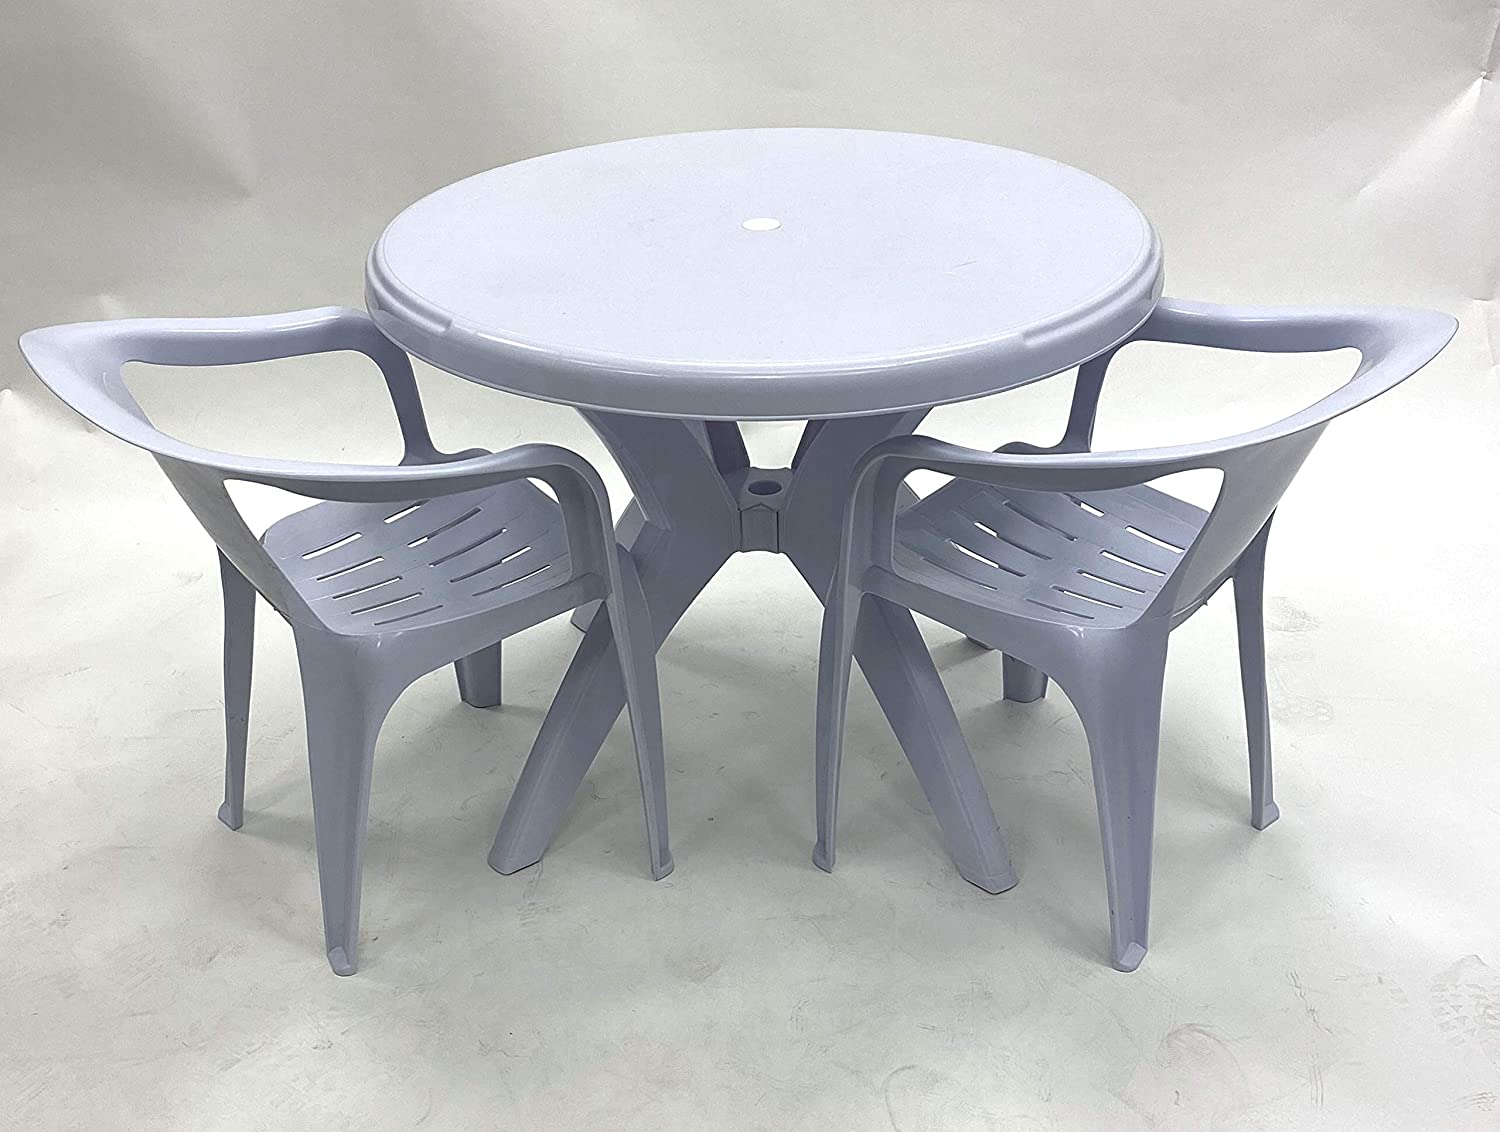 White Plastic Garden Furniture Round Table 2 X Statted Chairs